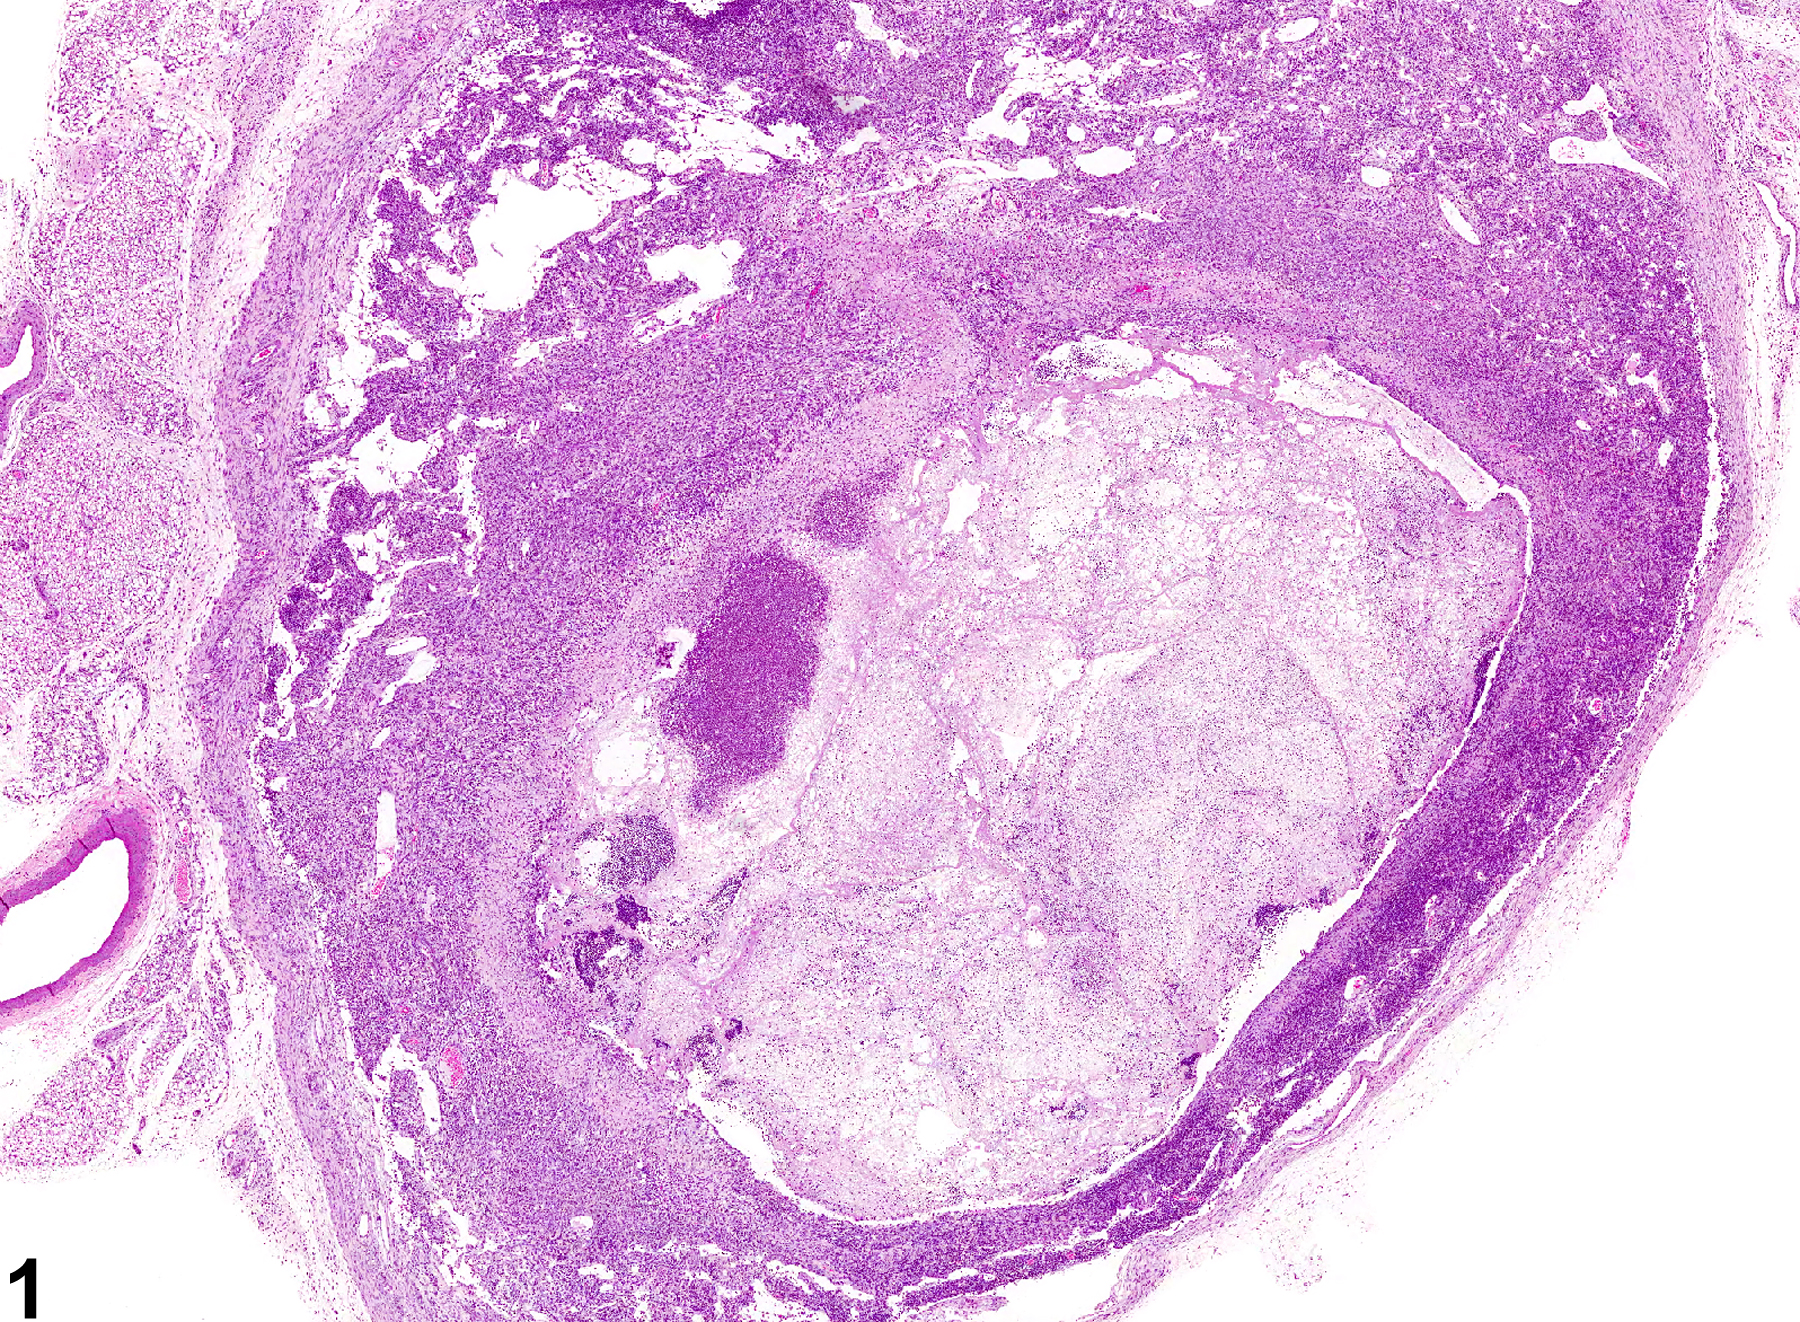 Image of inflammation in the lymph node from a male F344/N rat in a chronic study